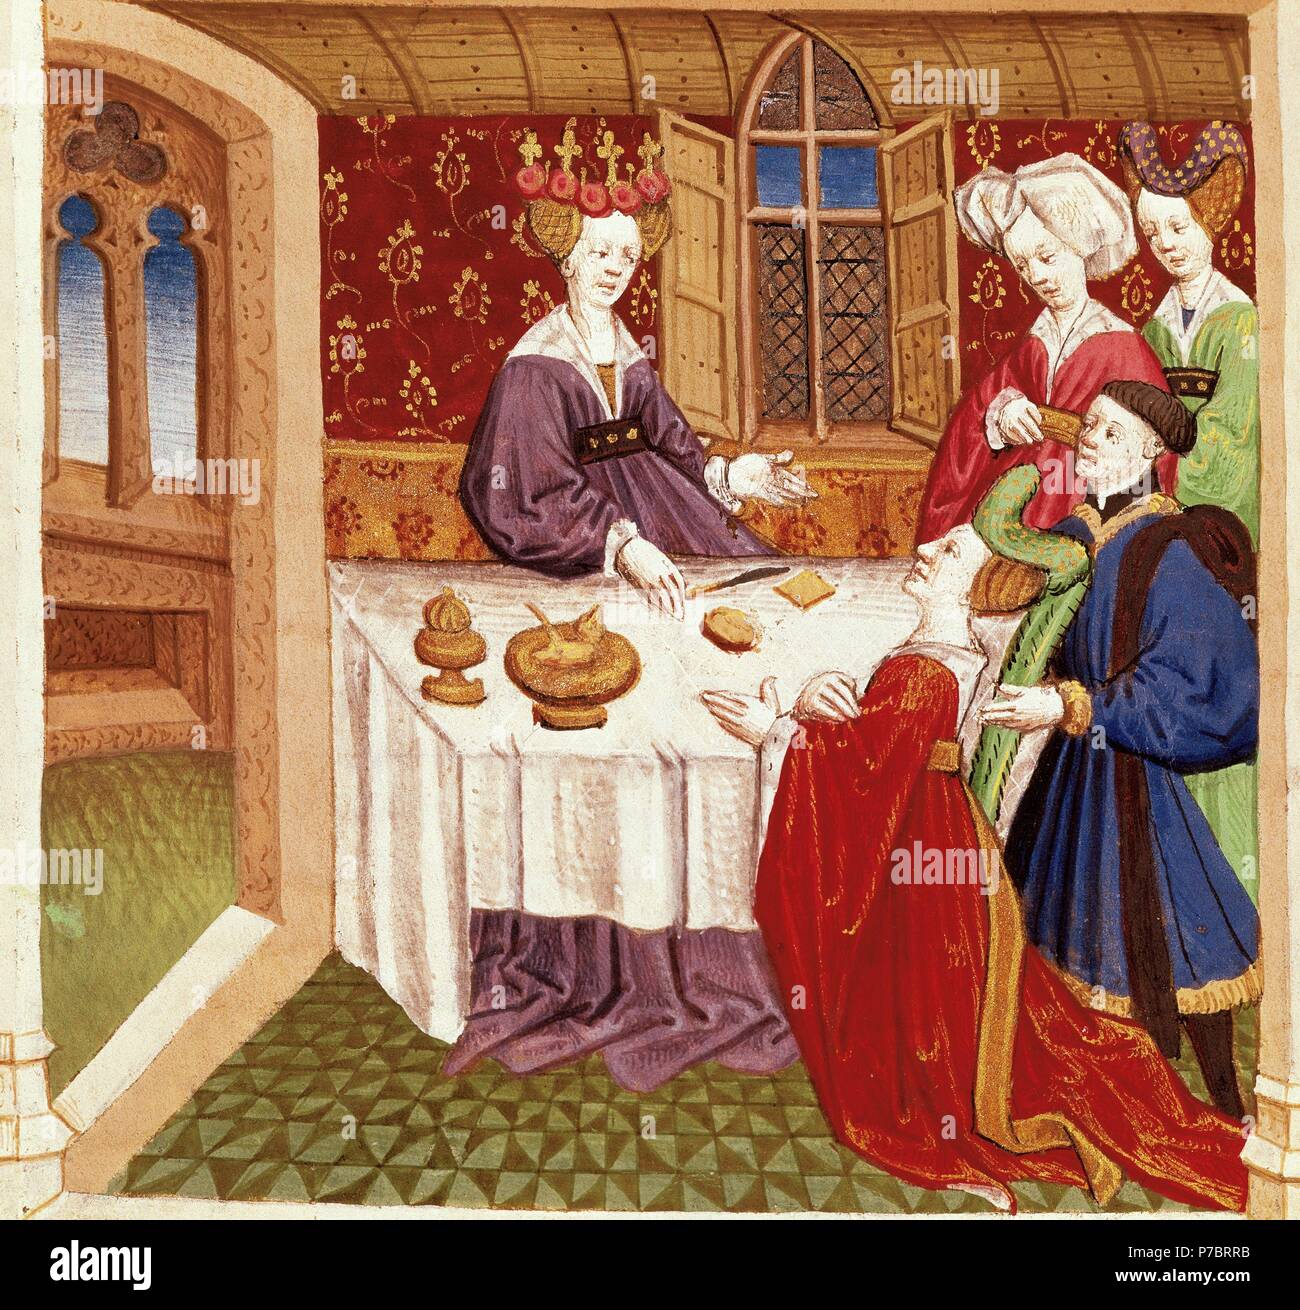 Tristan and Iseult. French medieval poetry, inspired by Celtic legend. Princess Iseult kneeling imploring the protection of Queen Guinevere, sitting at the table. Miniature of French School. Manuscript on prose, 15th century. Conde Museum. Chantilly Castle. France. Stock Photo